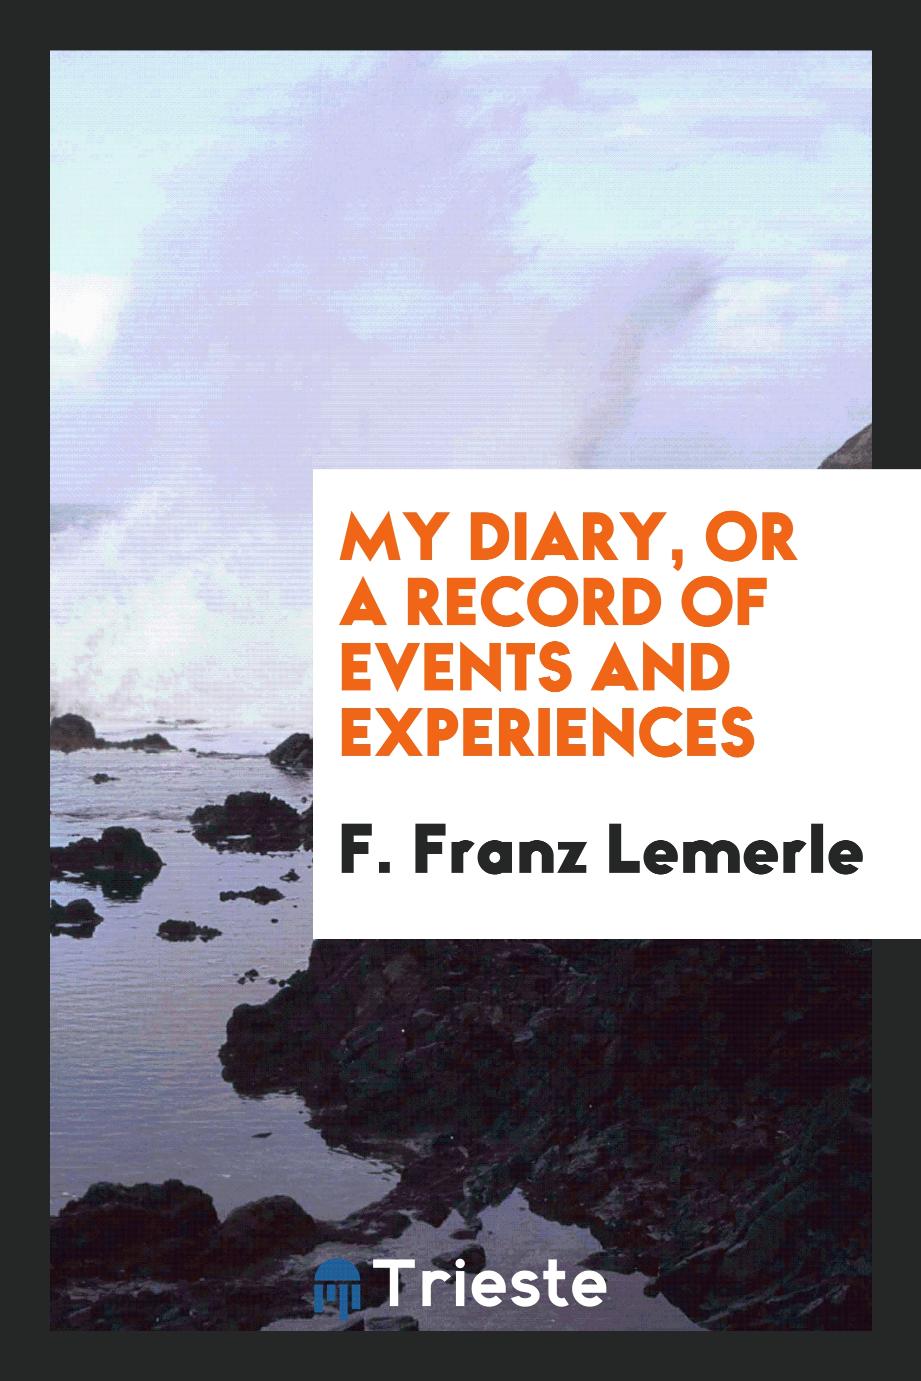 My Diary, or a Record of Events and Experiences